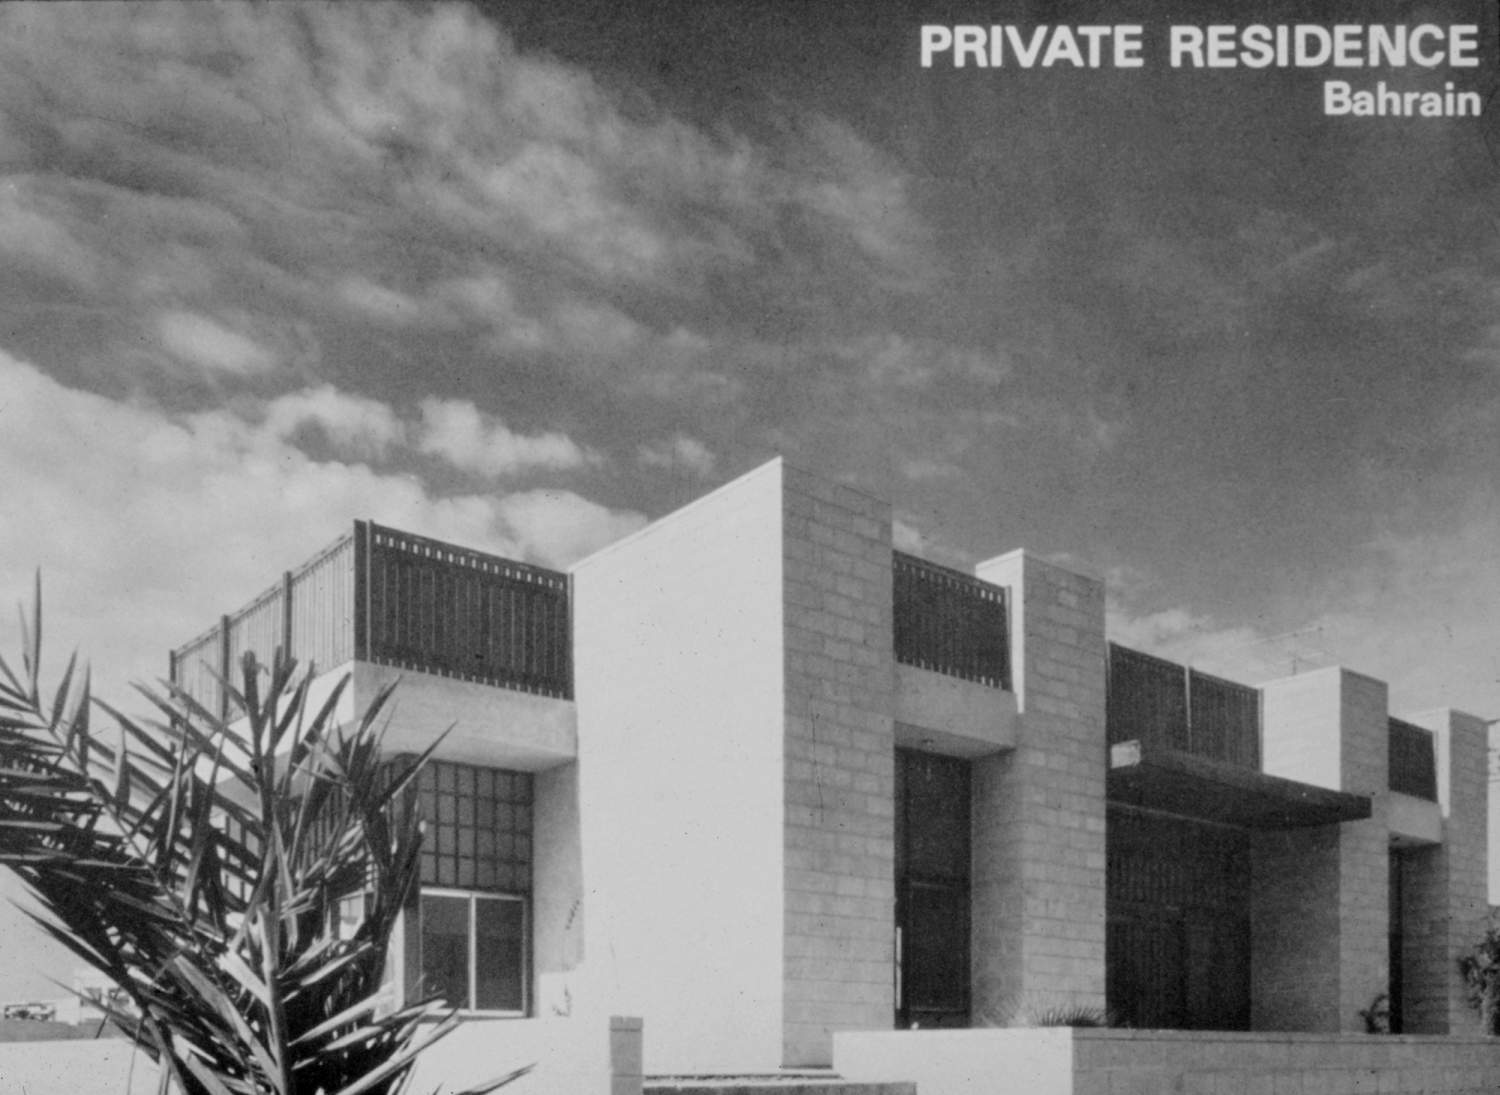 <p>View of a private residence in Bahrain designed by Makiya Associates</p>